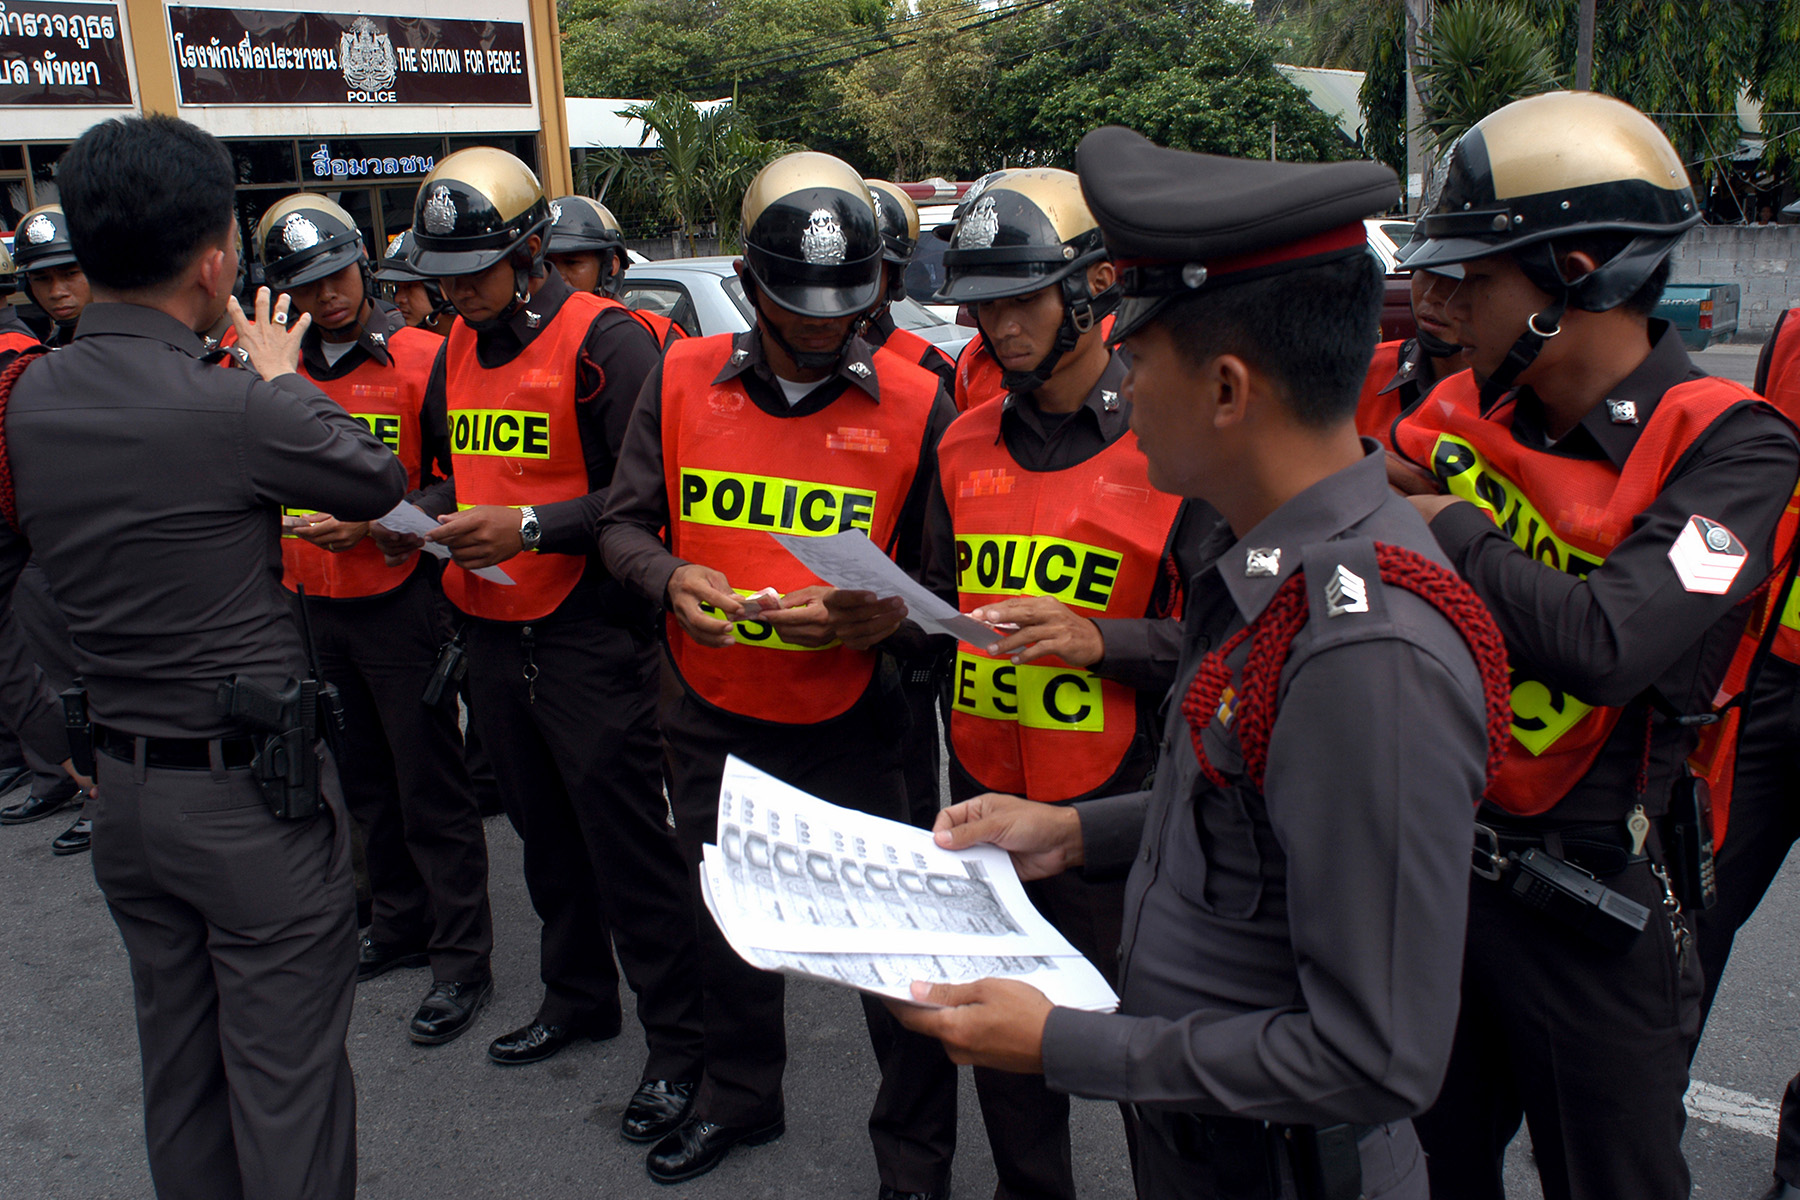 A police briefing, officers in uniforms, high visibility vests and riot helmets